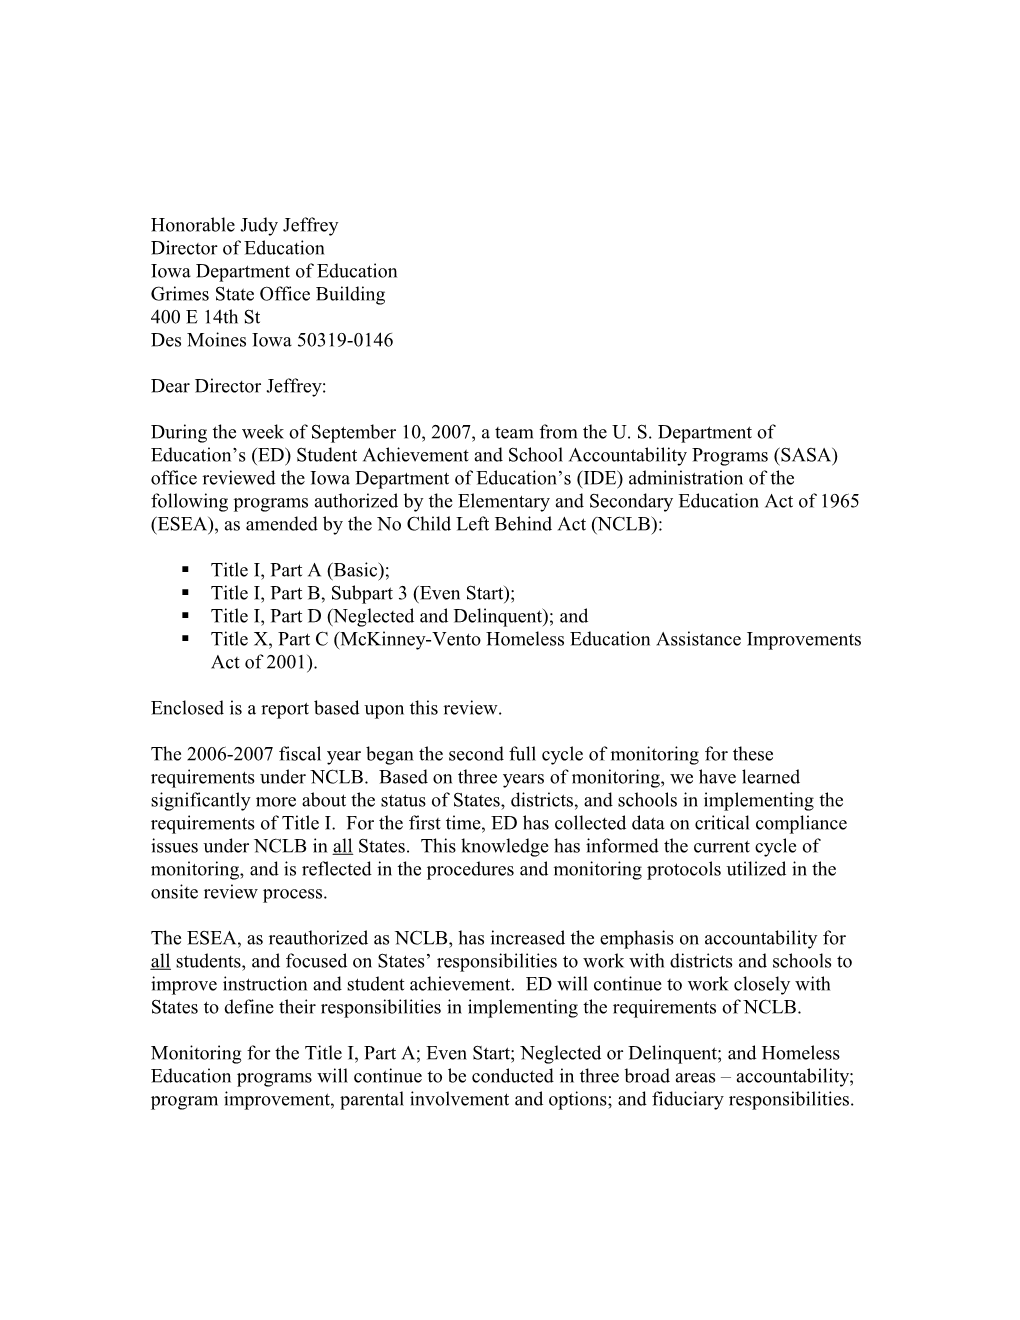 Iowa Department of Education Letter Re Monitoring Review Report (MS WORD)